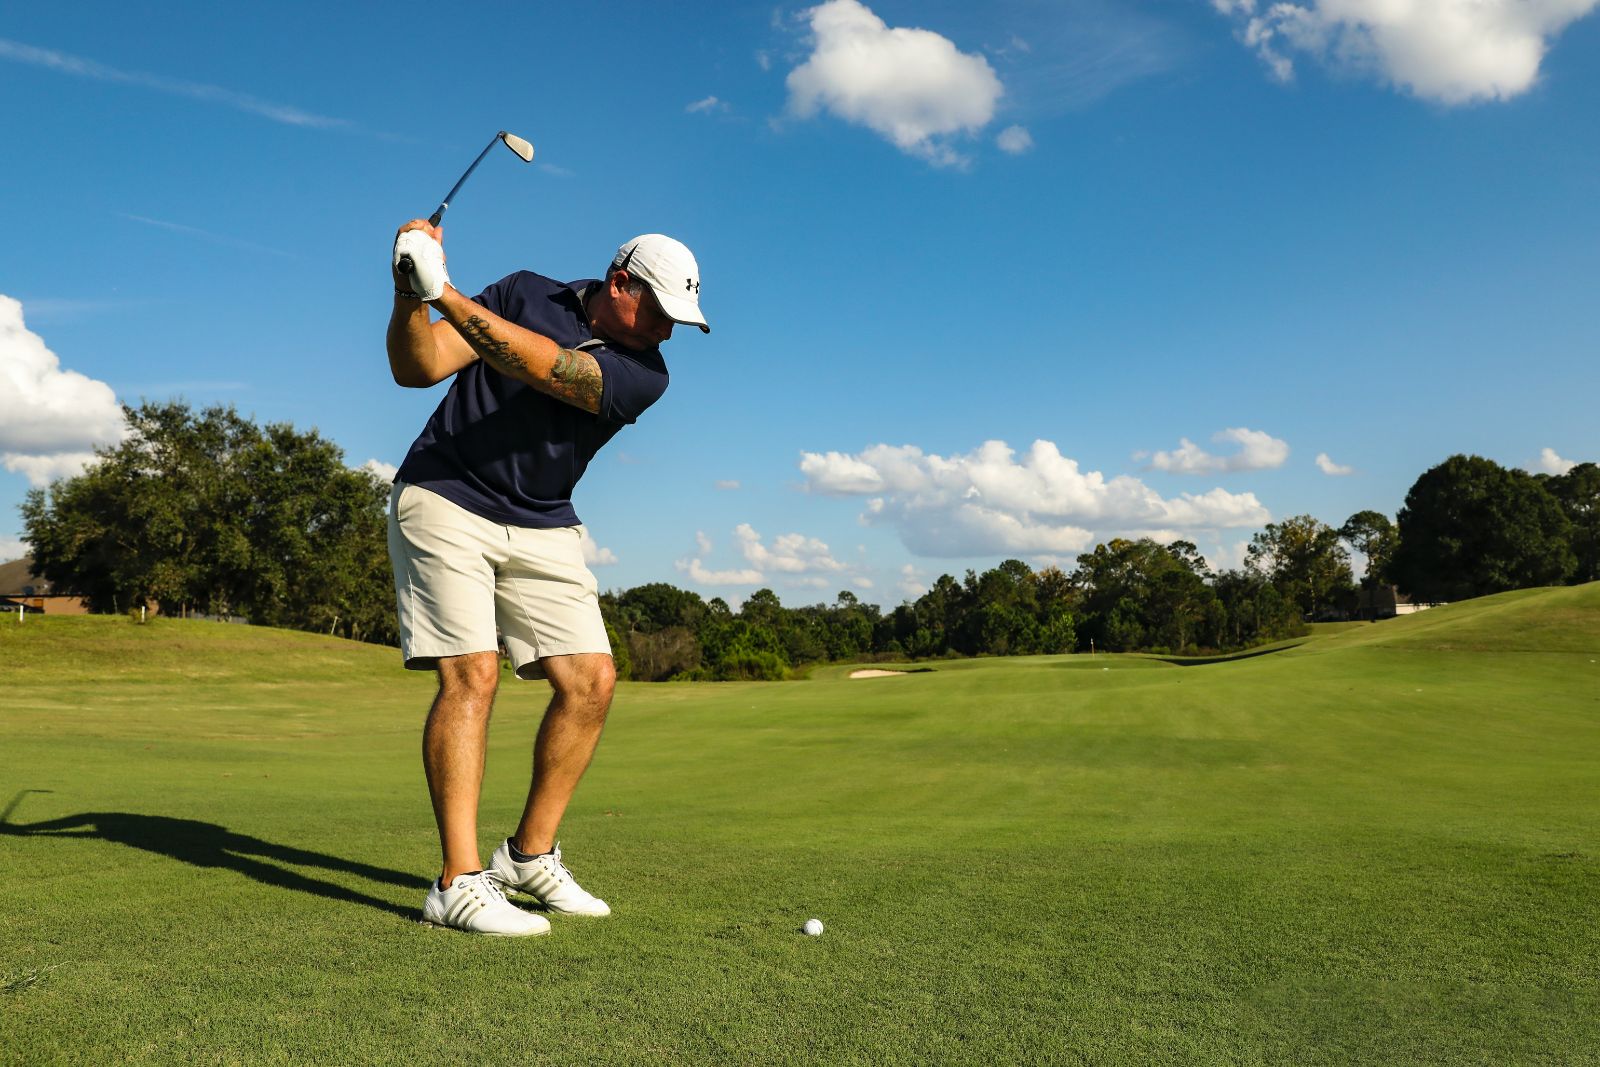 man in a golf shirt, shorts and a white hat, swinging a golf club at a ball at The Gilwood Golf Club; greens, trees and blue skies with white clouds in the distance